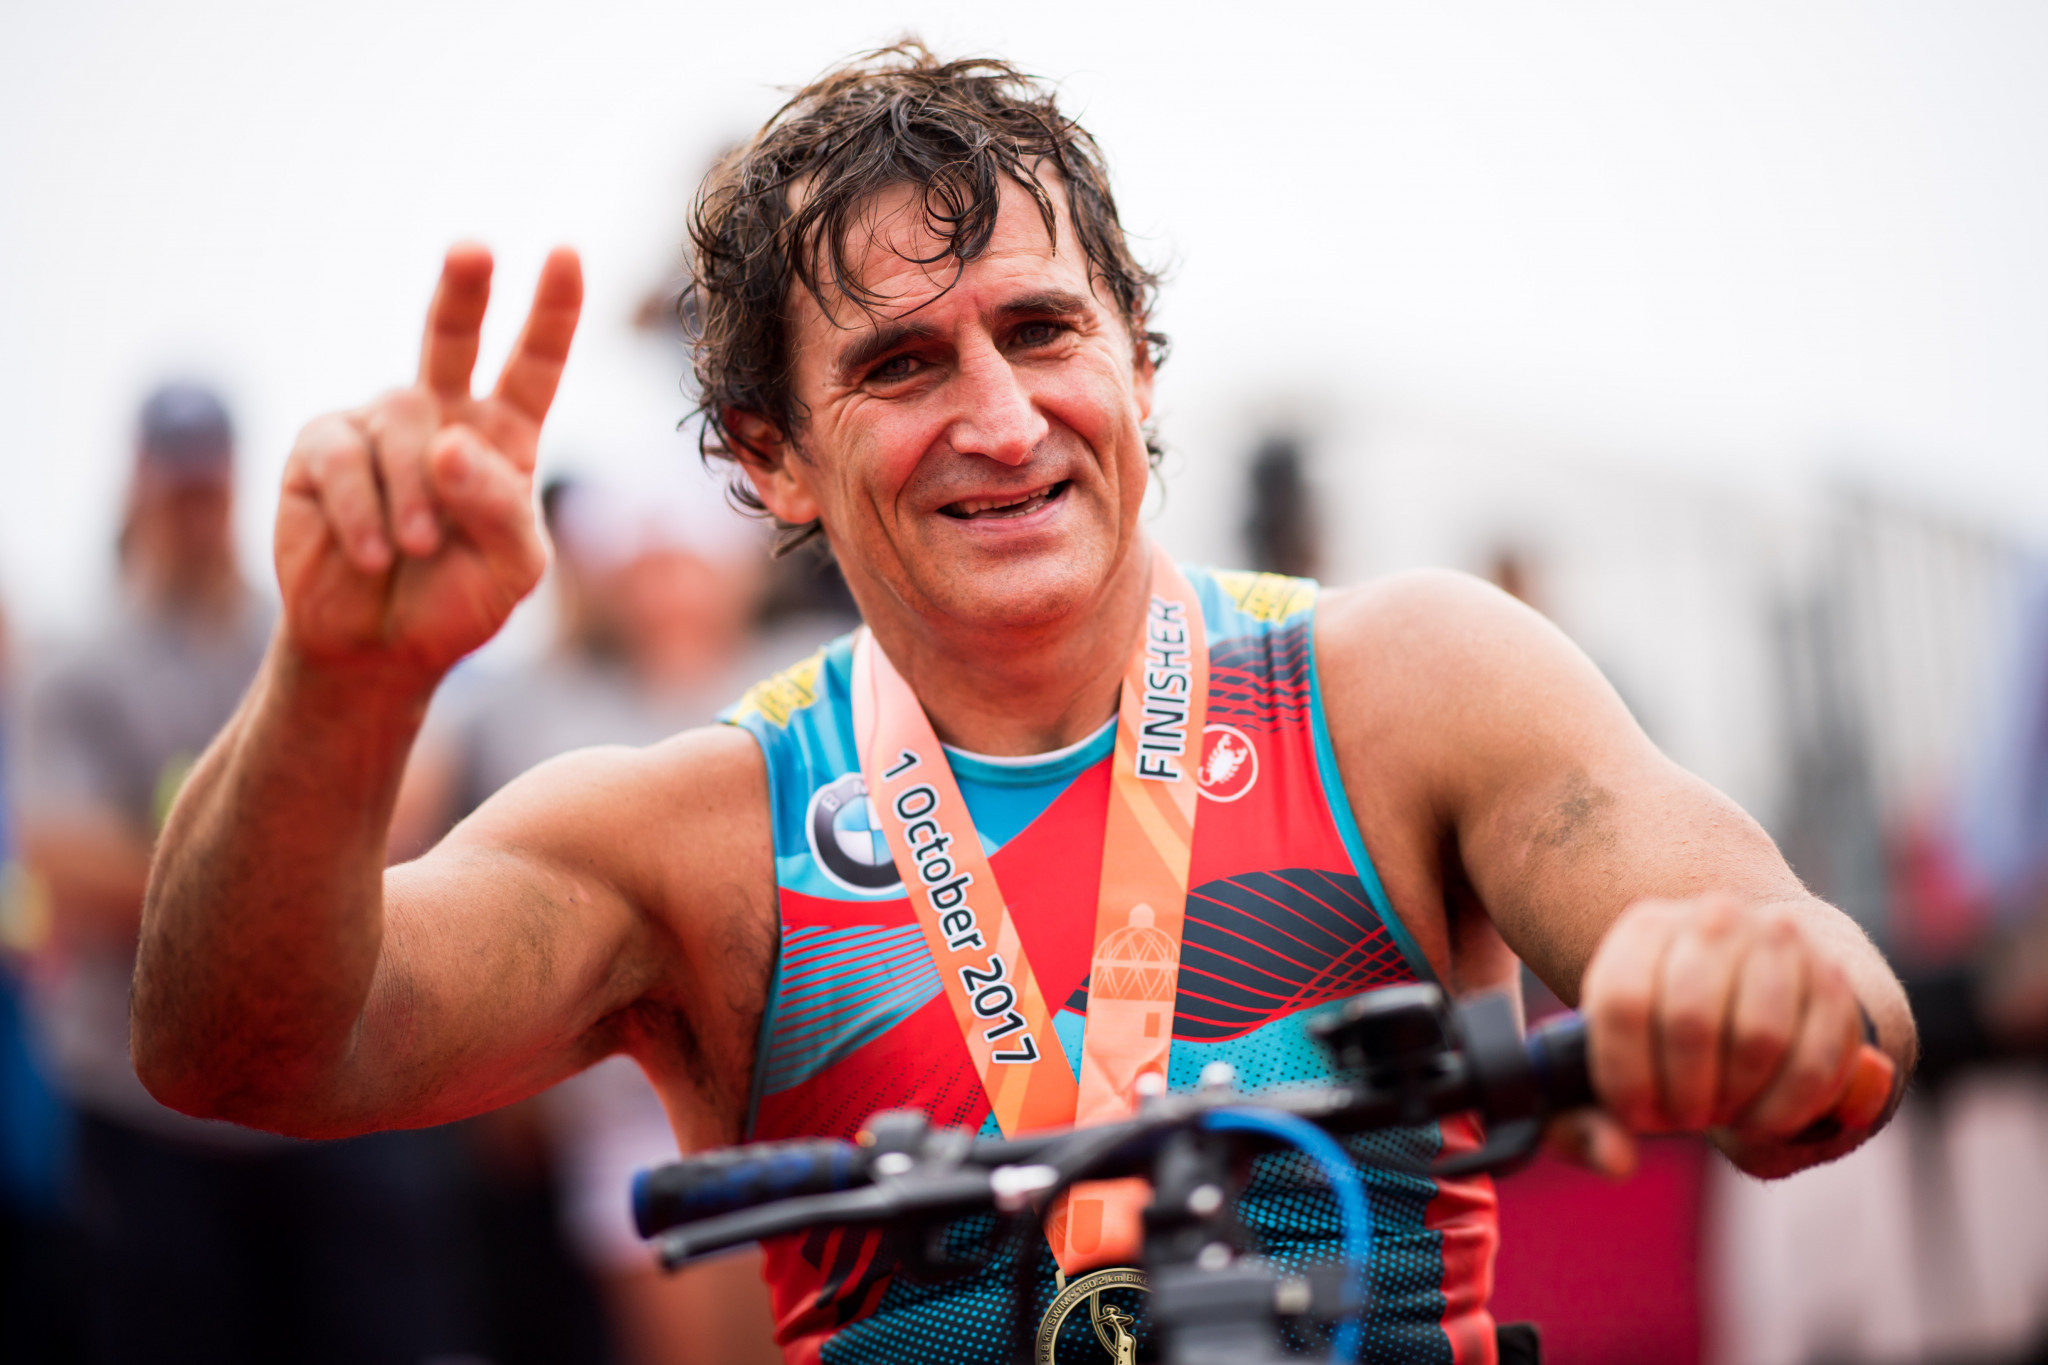 Alex Zanardi will not compete at the Tokyo 2020 Paralympics following a serious crash last year ©Getty Images